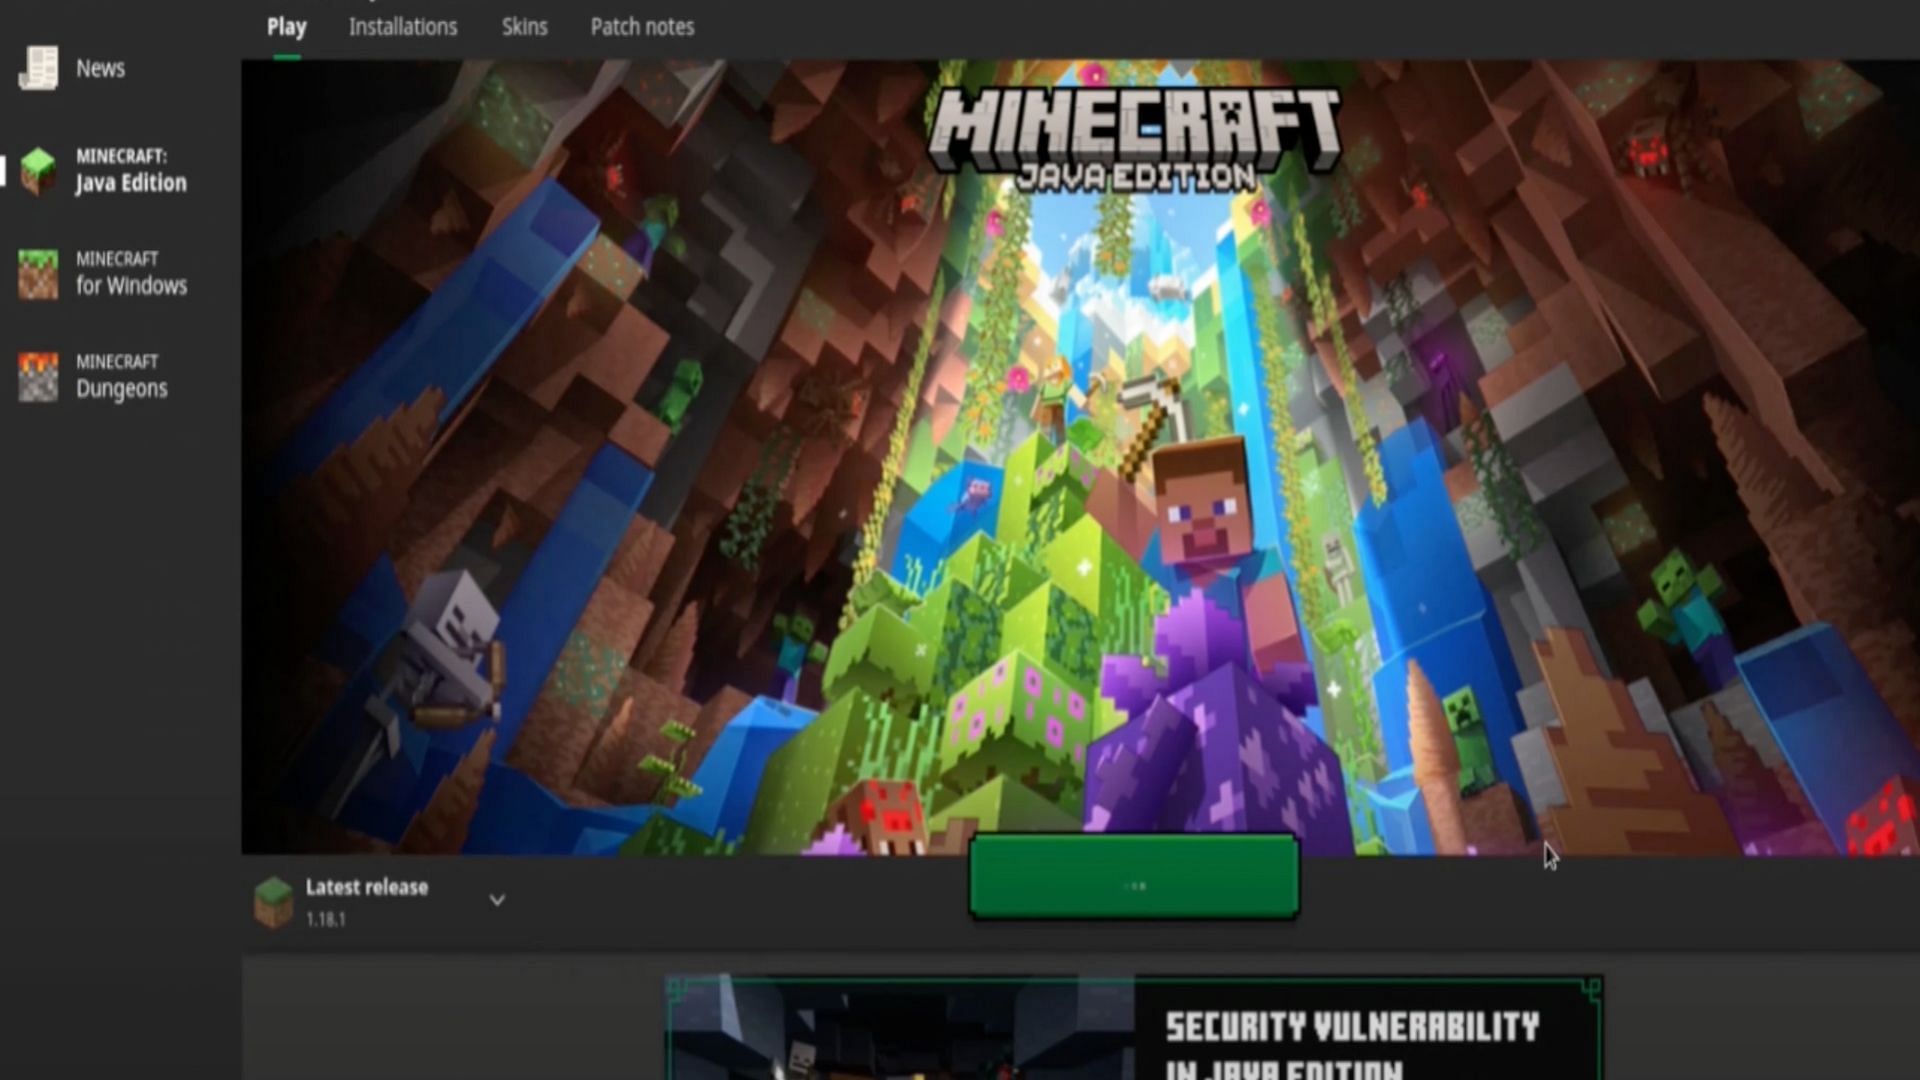 More Chromebook models eligible to get Minecraft for free